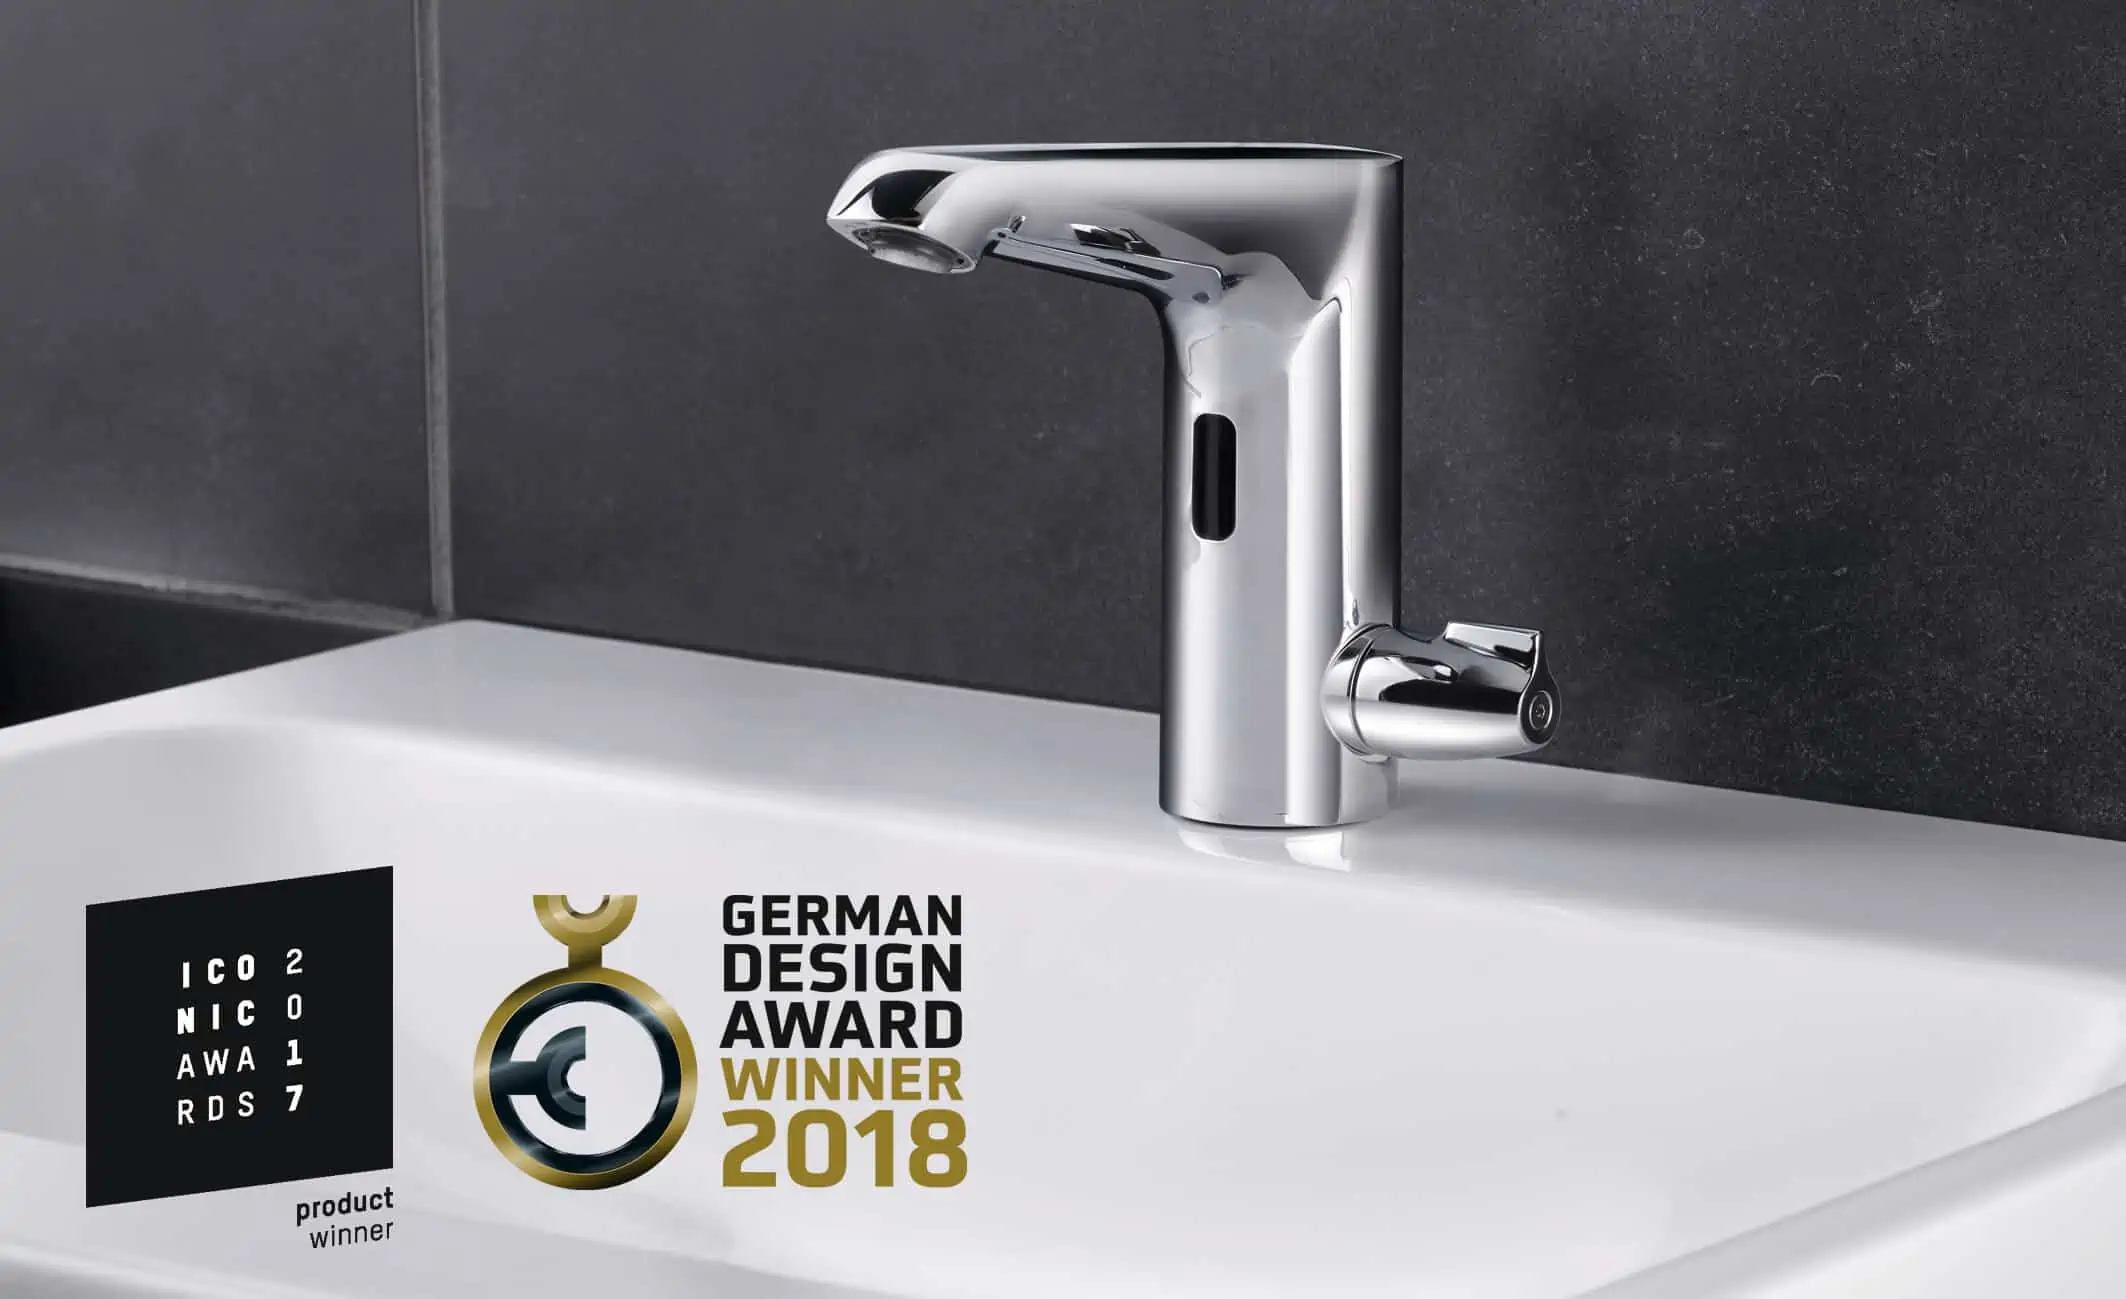 german design award 2019 winner schell xeris sensor faucet family for bathrooms and other public sanitary rooms in chrome finish